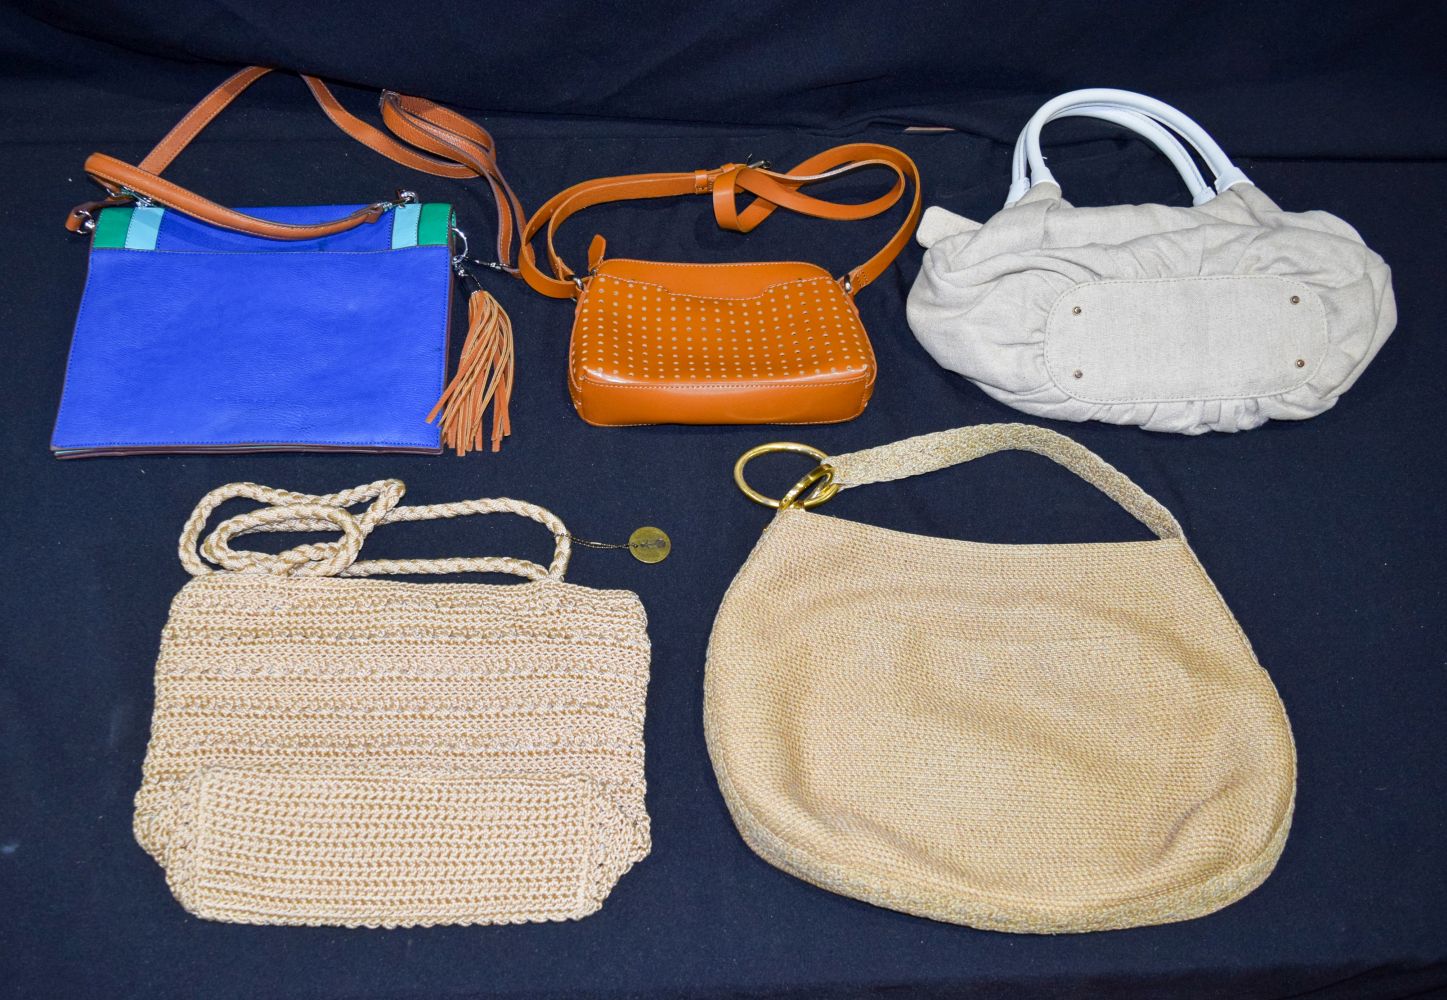 A collection of handbags including a Melie Bianco Vegan leather bag, Kate spade etc (5) - Image 2 of 2